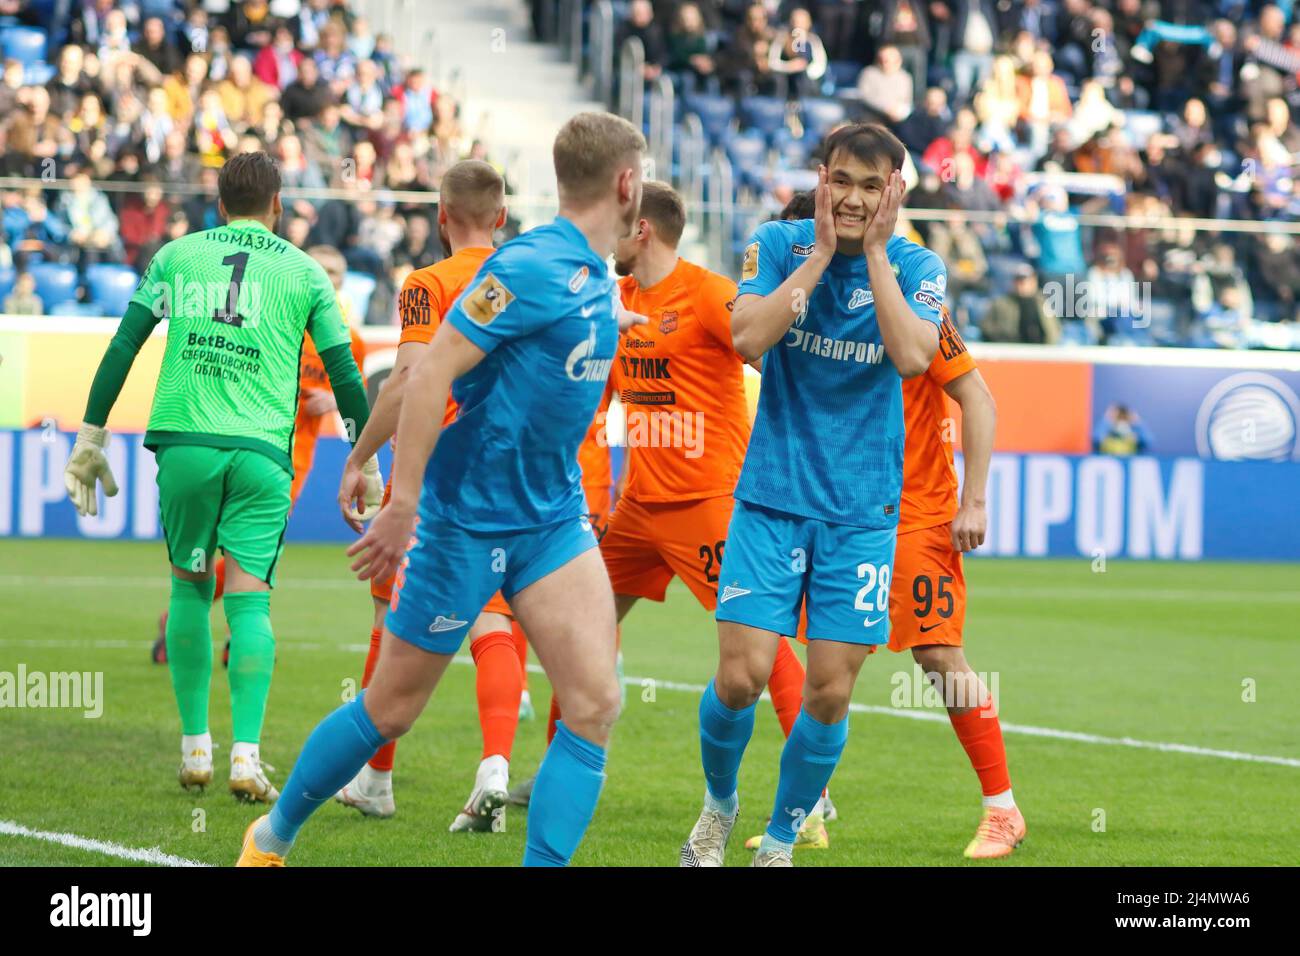 Saint Petersburg, Russia. 16th Apr, 2022. Nyraly Alip (No.28), Dmitri Chistyakov (No.2) of Zenit, Ilya Pomazun (No.1) of Ural celebrate a goal during the Russian Premier League football match between Zenit Saint Petersburg and Ural Yekaterinburg at Gazprom Arena. Final score; Zenit 3:1 Ural. Credit: SOPA Images Limited/Alamy Live News Stock Photo